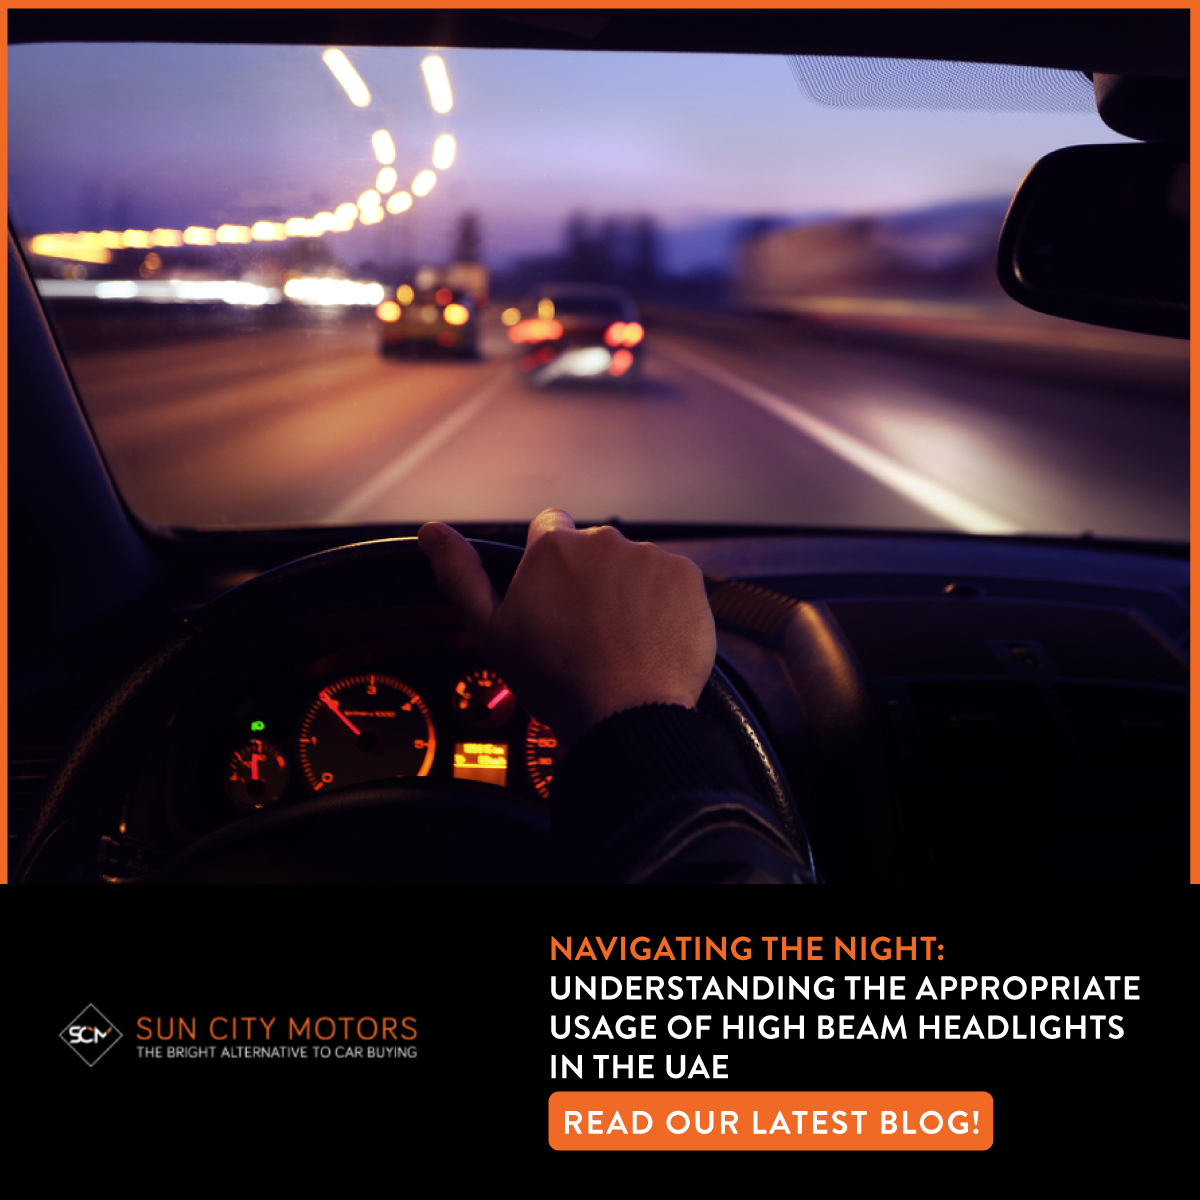 Navigating the Night: Understanding the Appropriate Usage of High Beam Headlights in the UAE